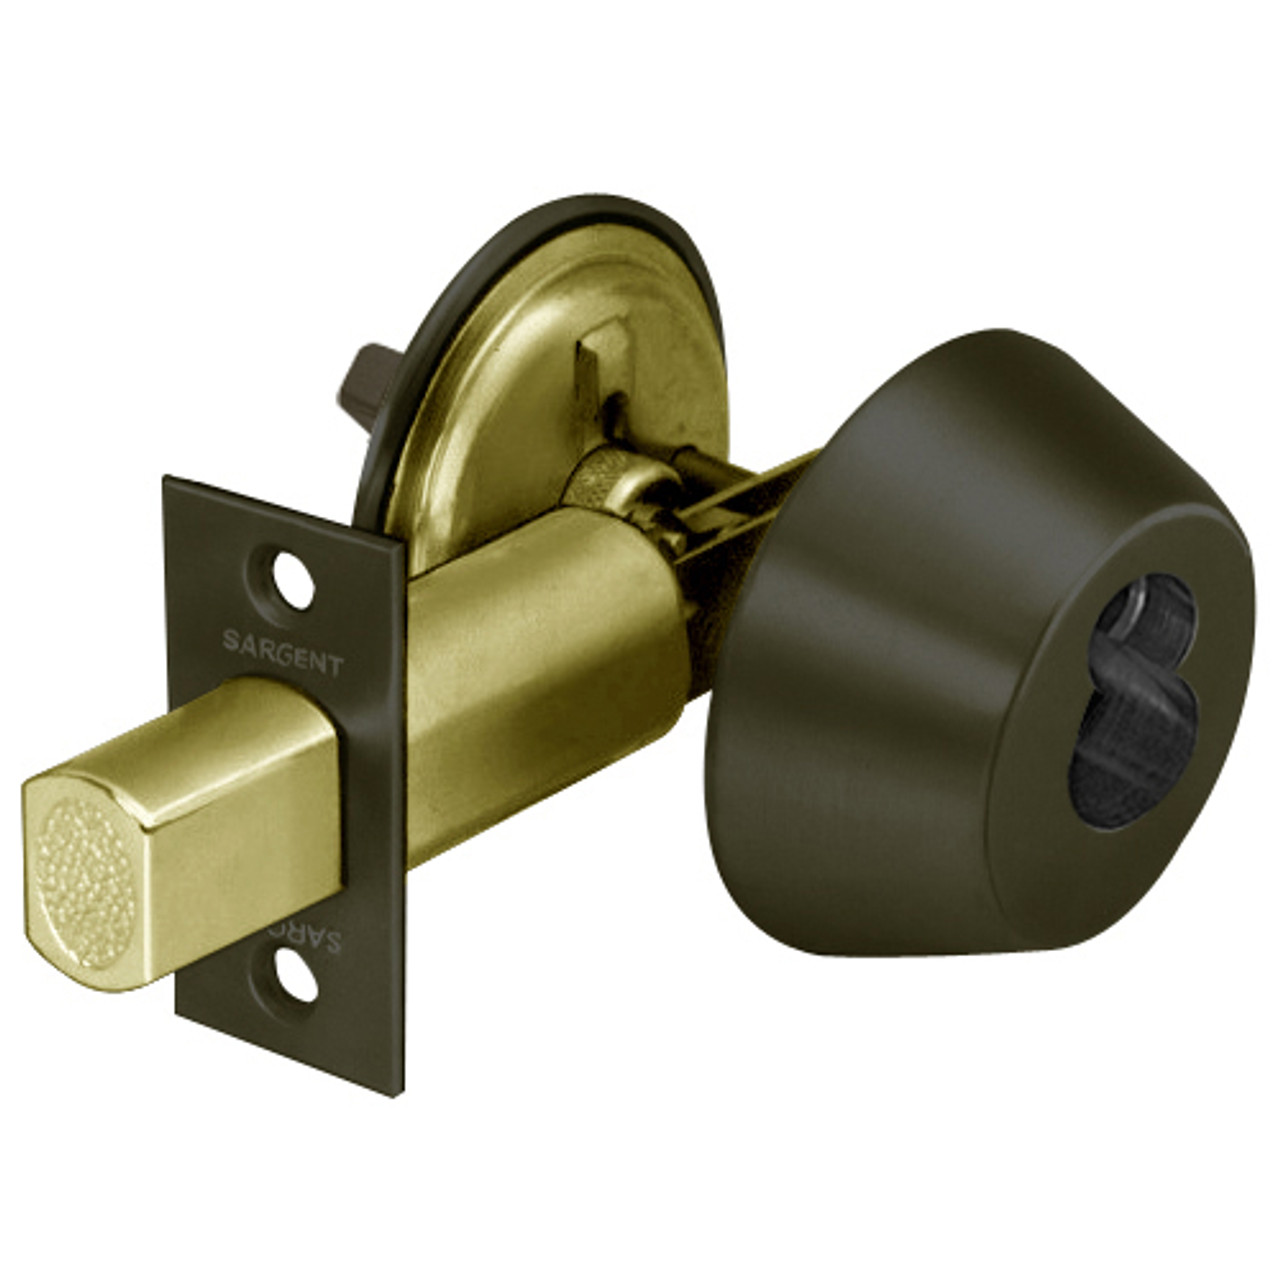 70-485-10B Sargent 480 Series Single Cylinder Auxiliary Deadbolt Lock with Thumbturn Prepped for SFIC in Oil Rubbed Bronze